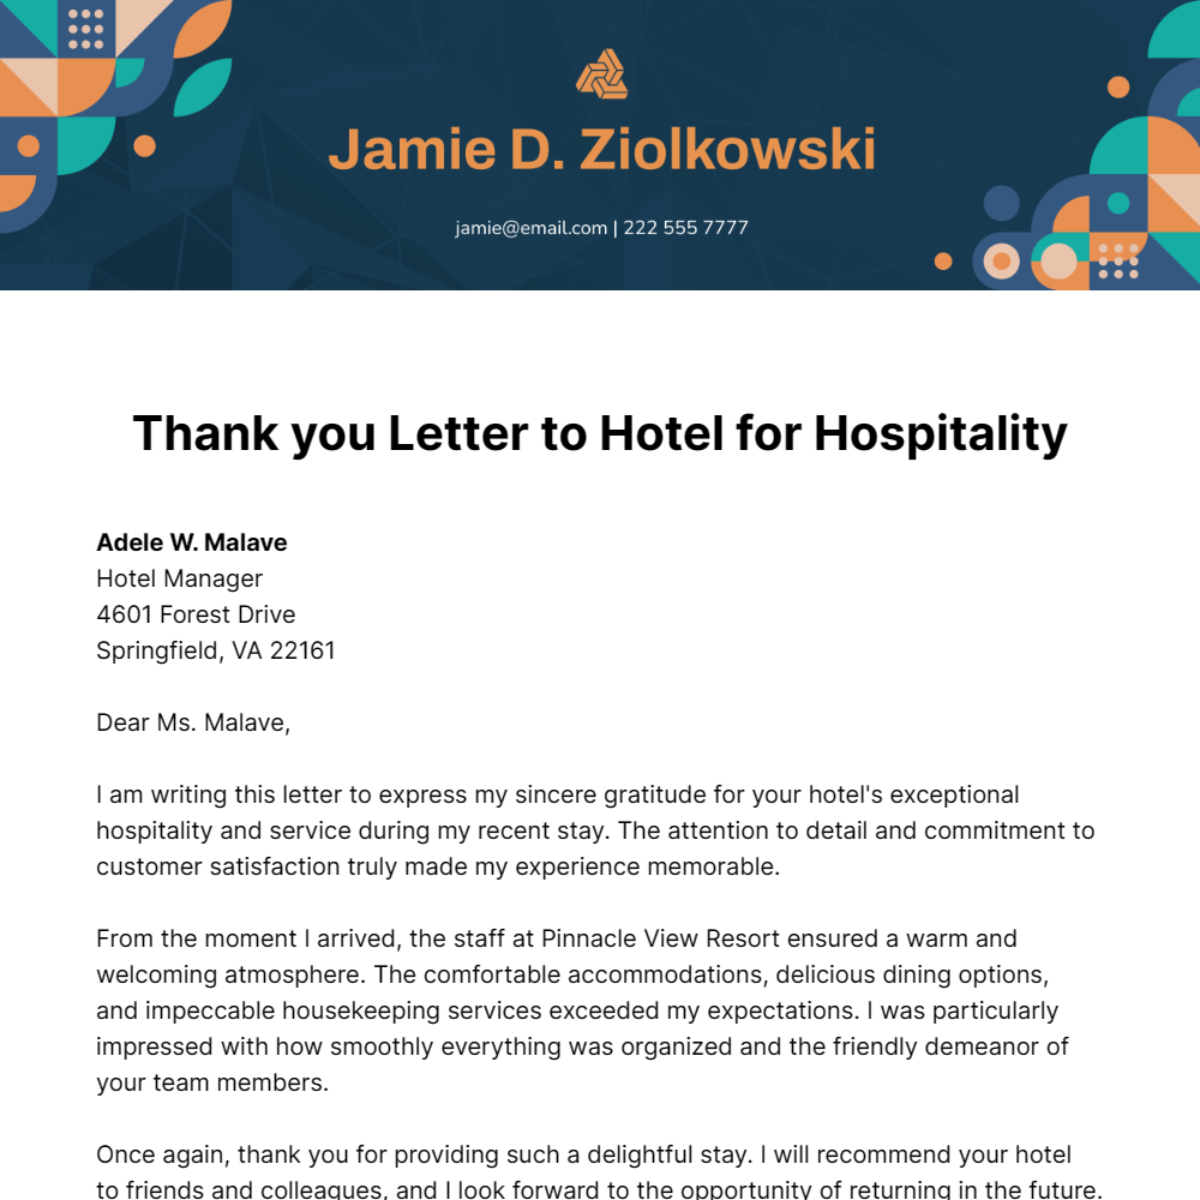 Thank you Letter to Hotel for Hospitality Template